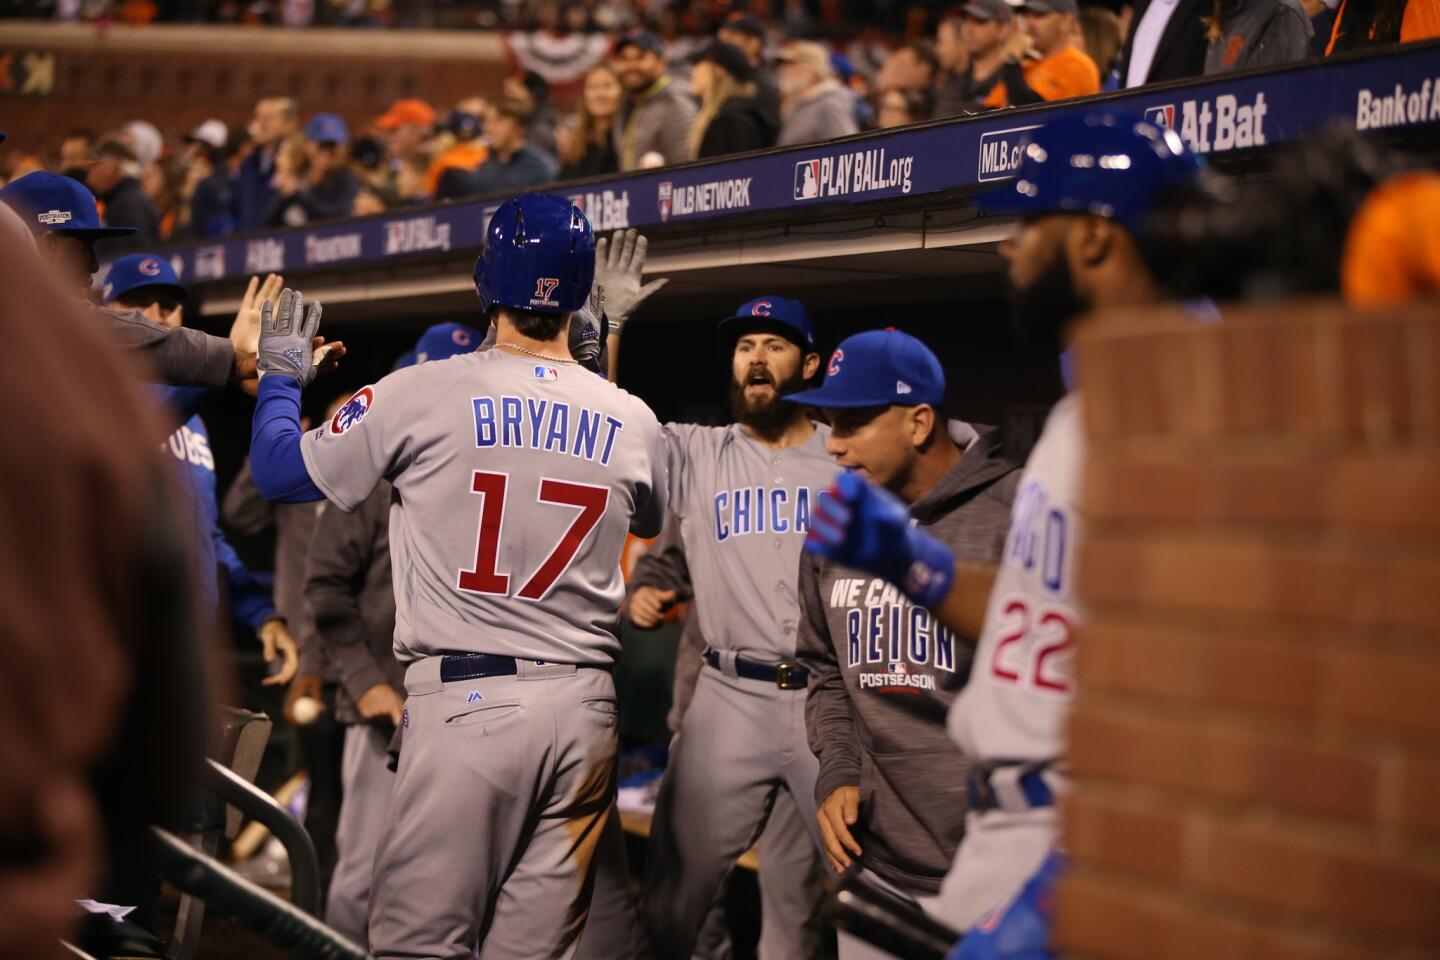 ct-cubs-giants-game4-nlds-photos-010